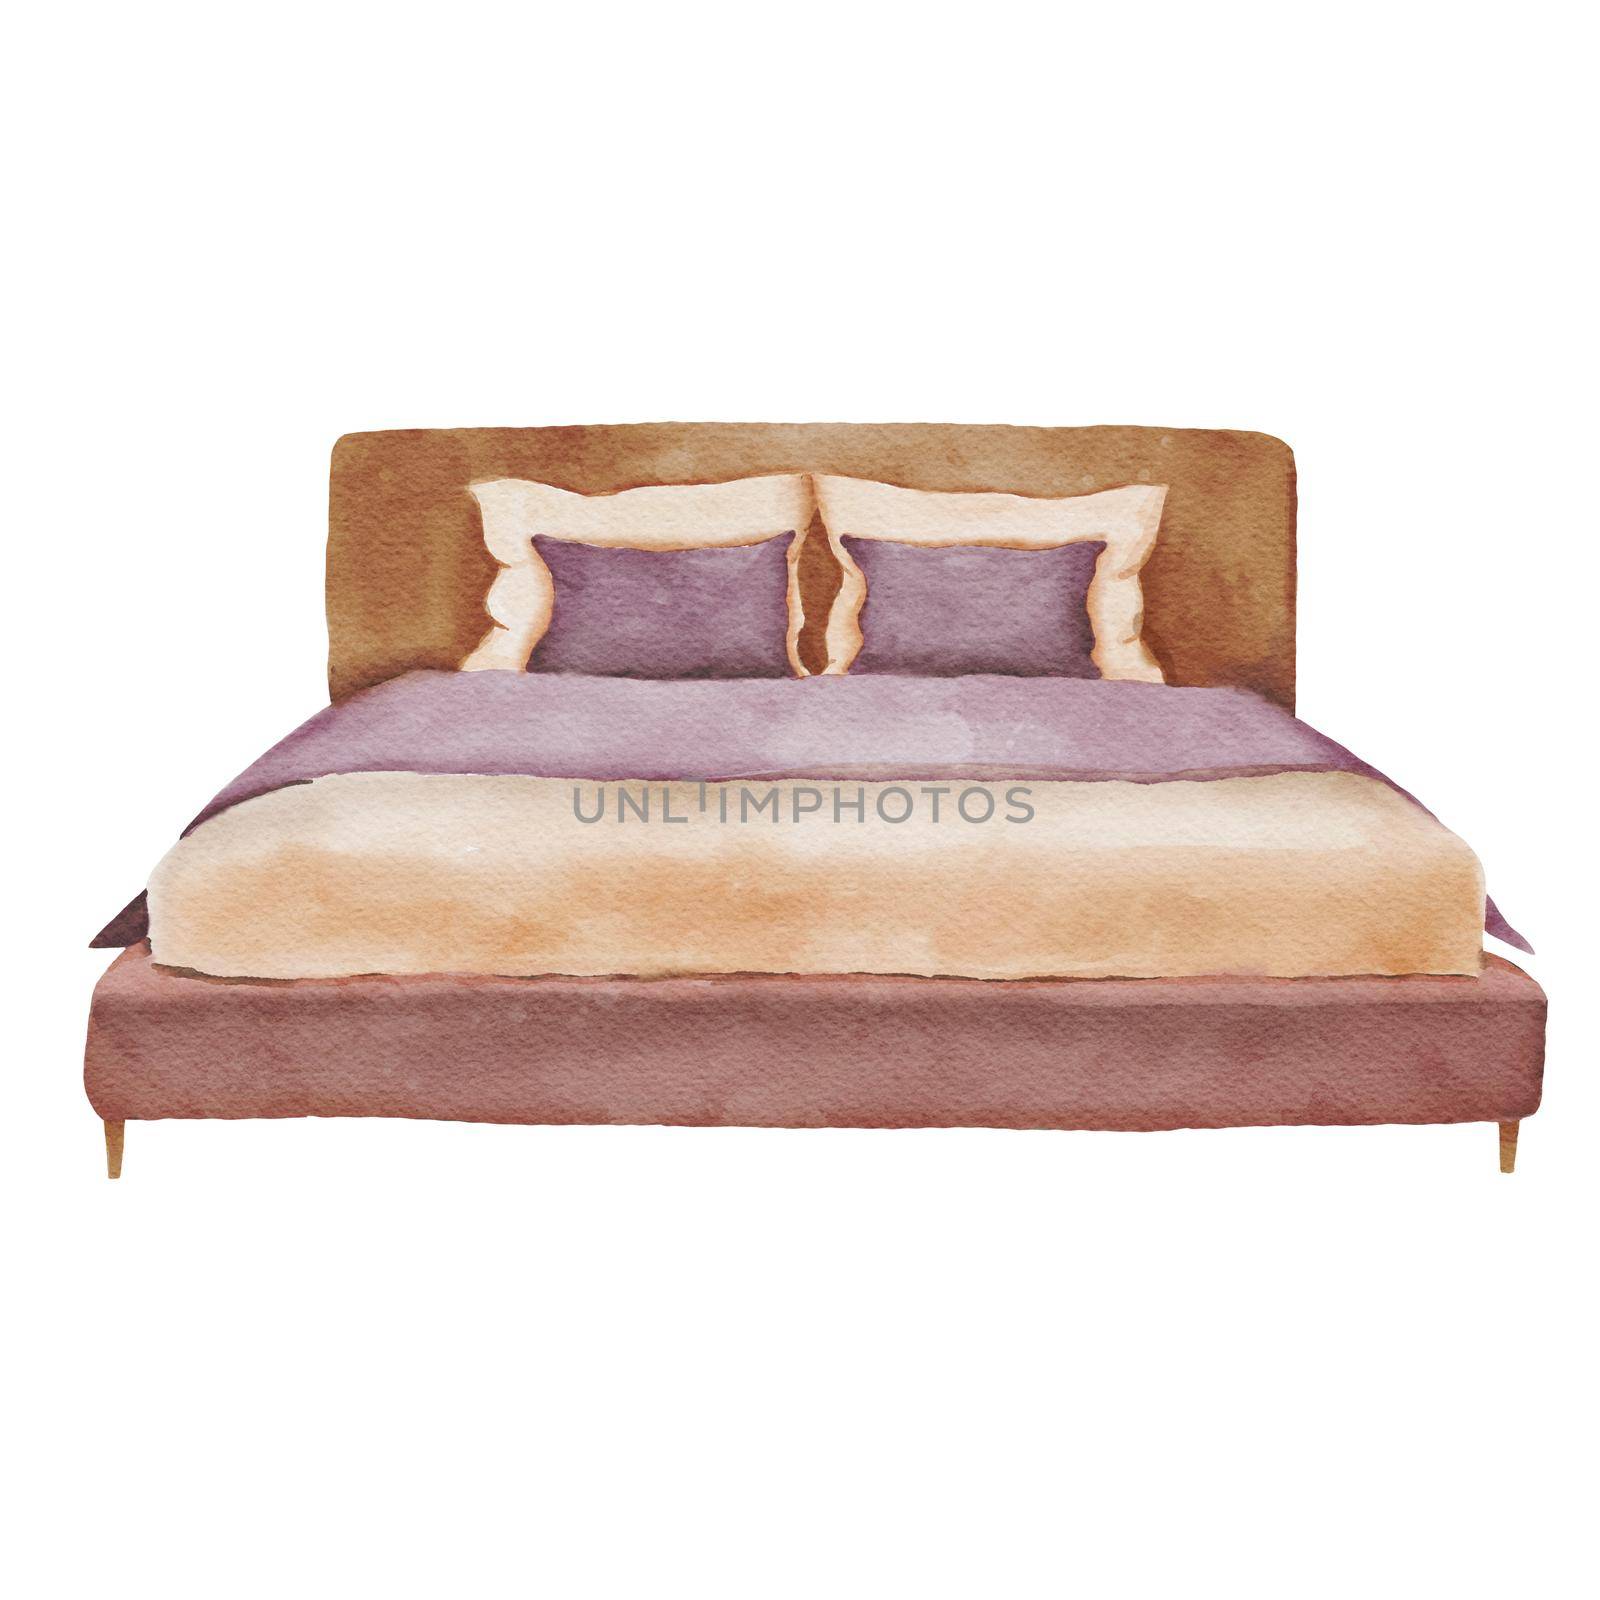 Watercolor hand painted bed. Furniture illustration isolated on white